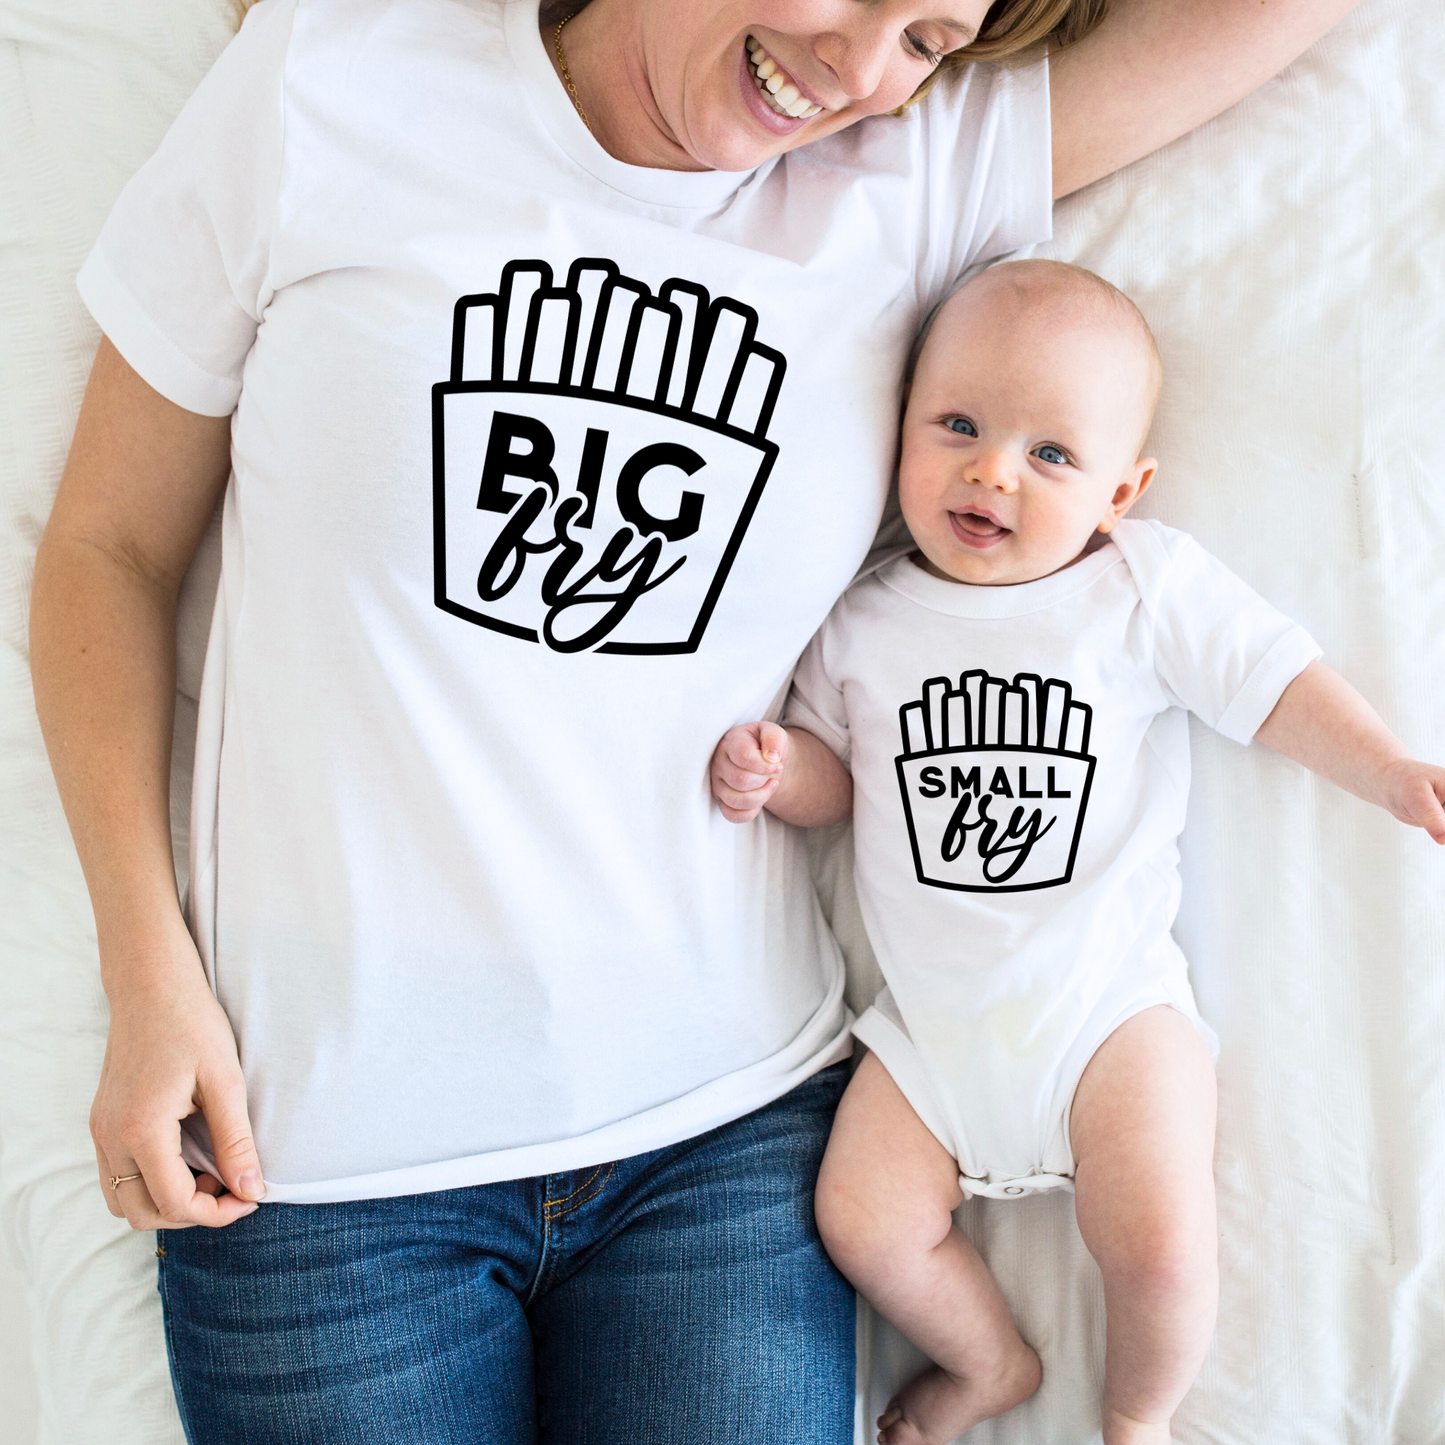 Big Fry & Small Fry - Mommy and Baby Clothes